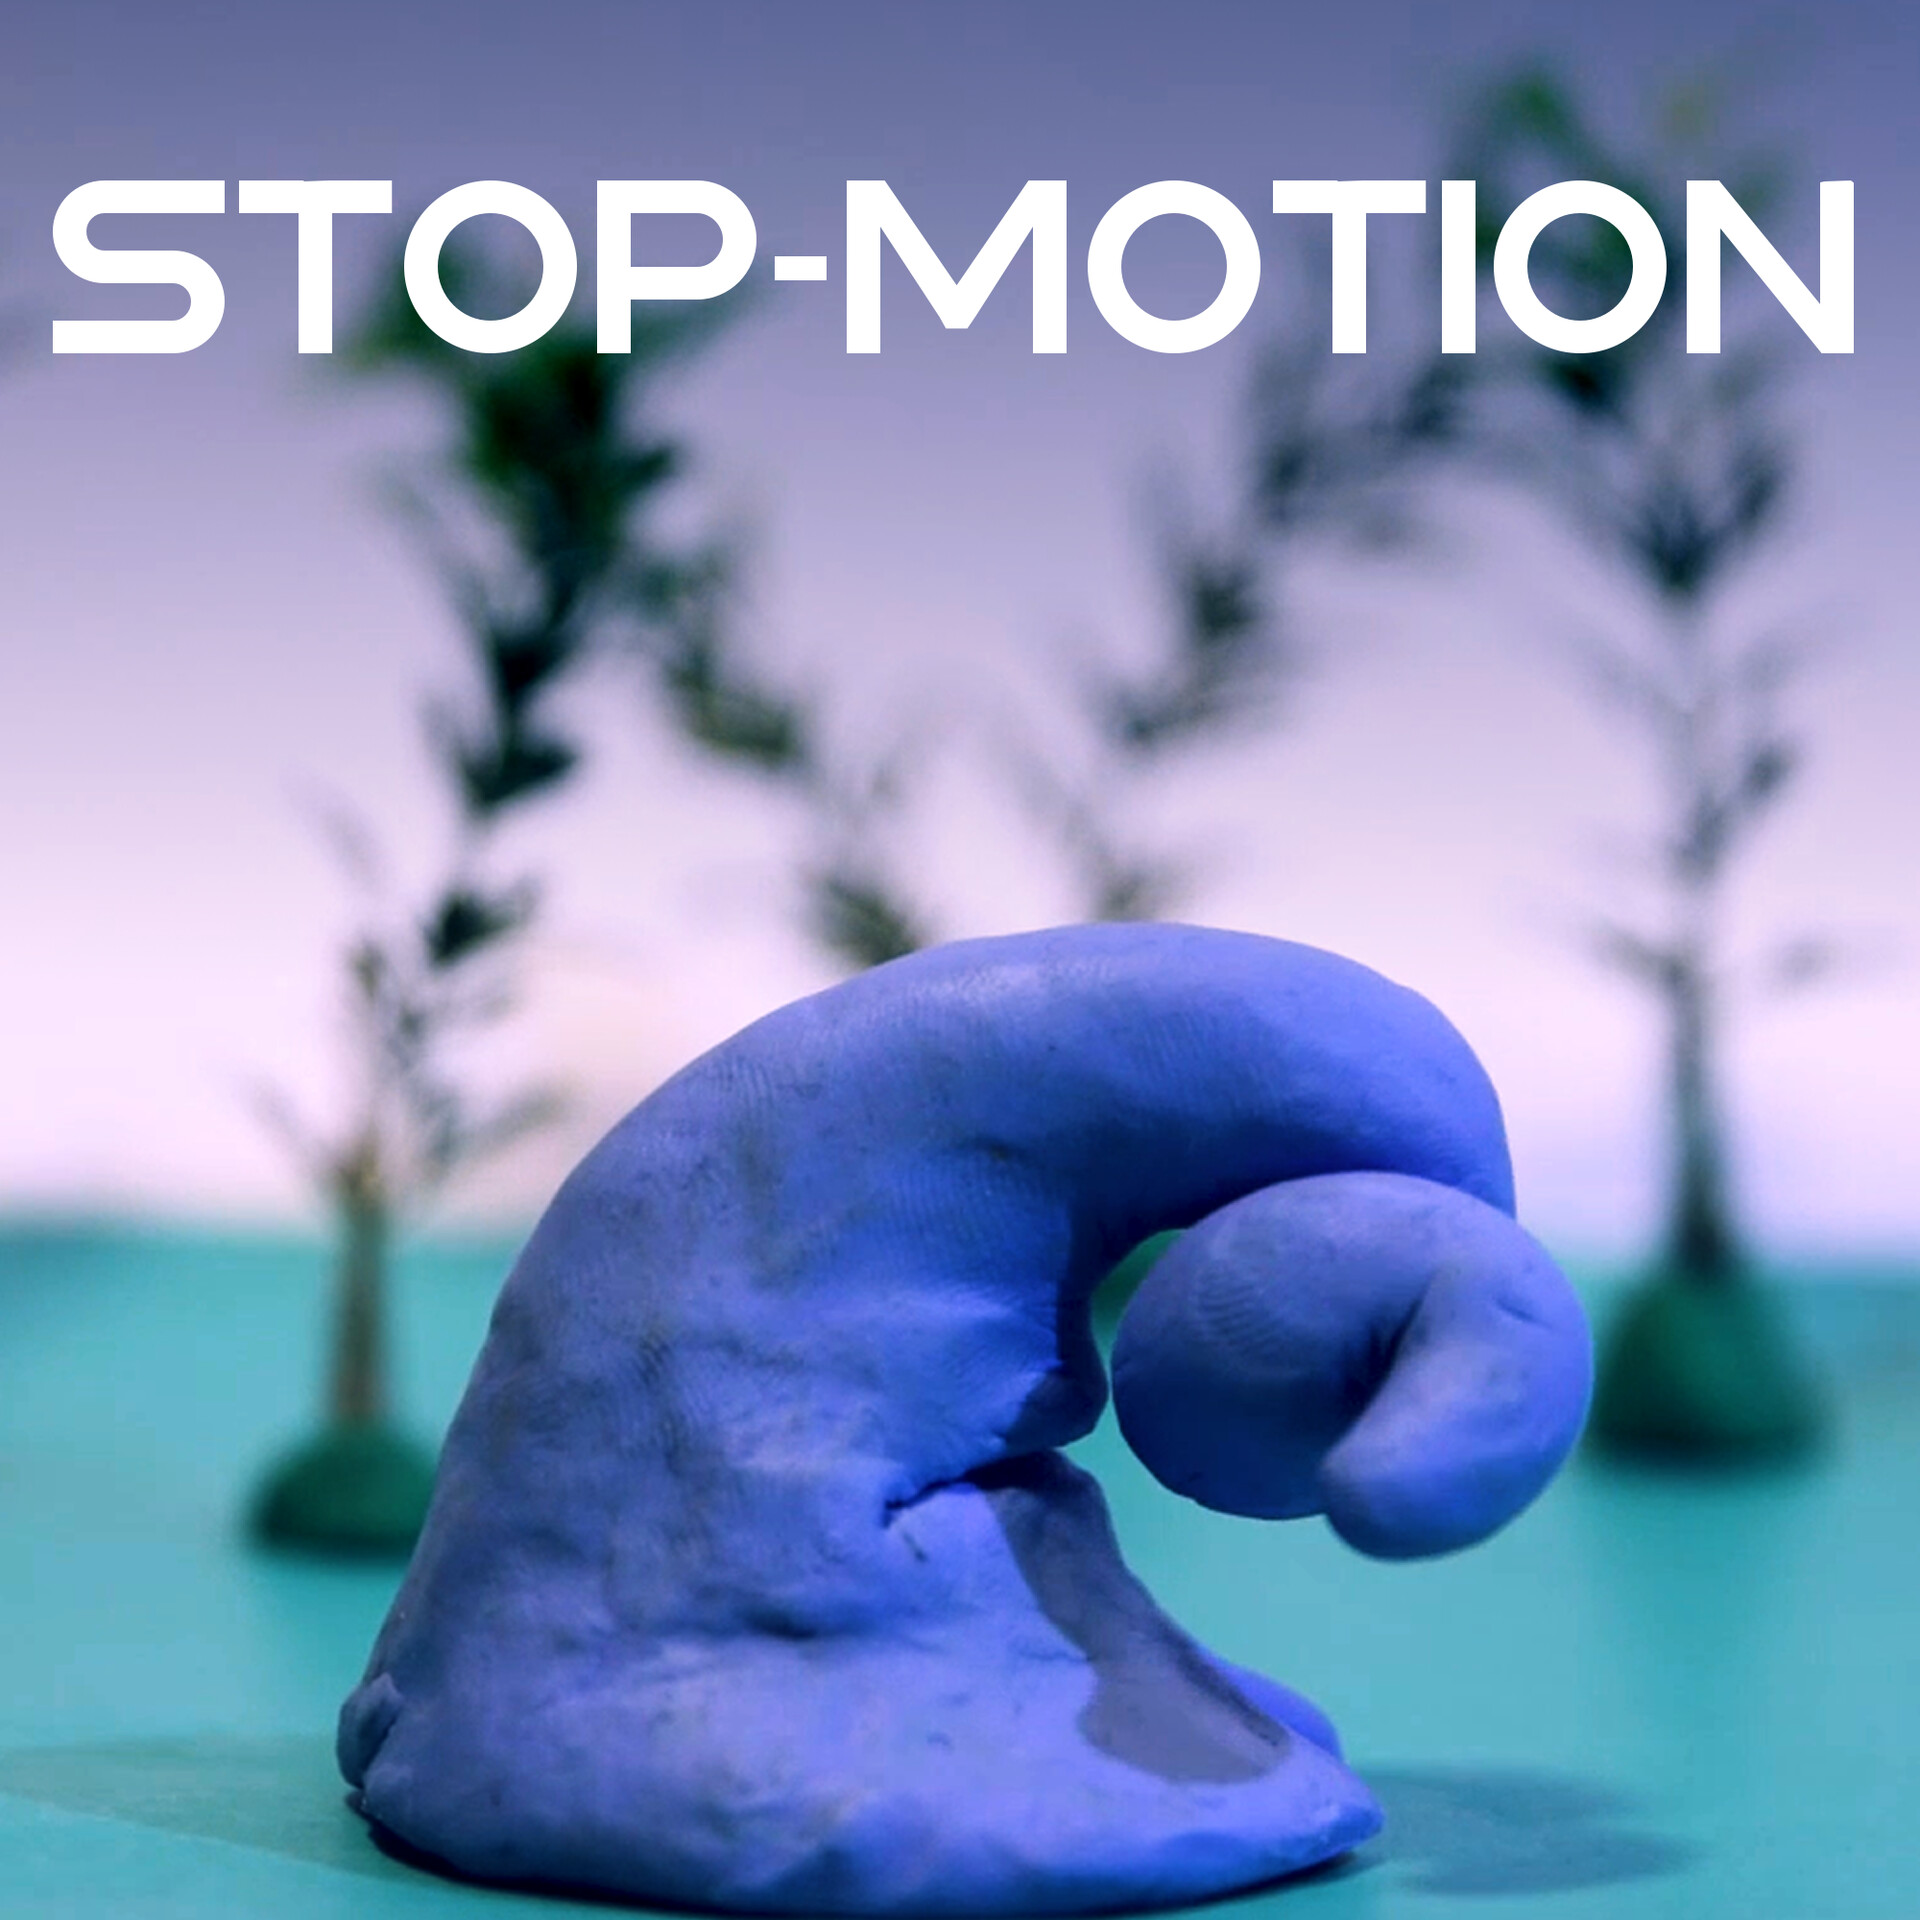 ArtStation - Stop motion and claymation